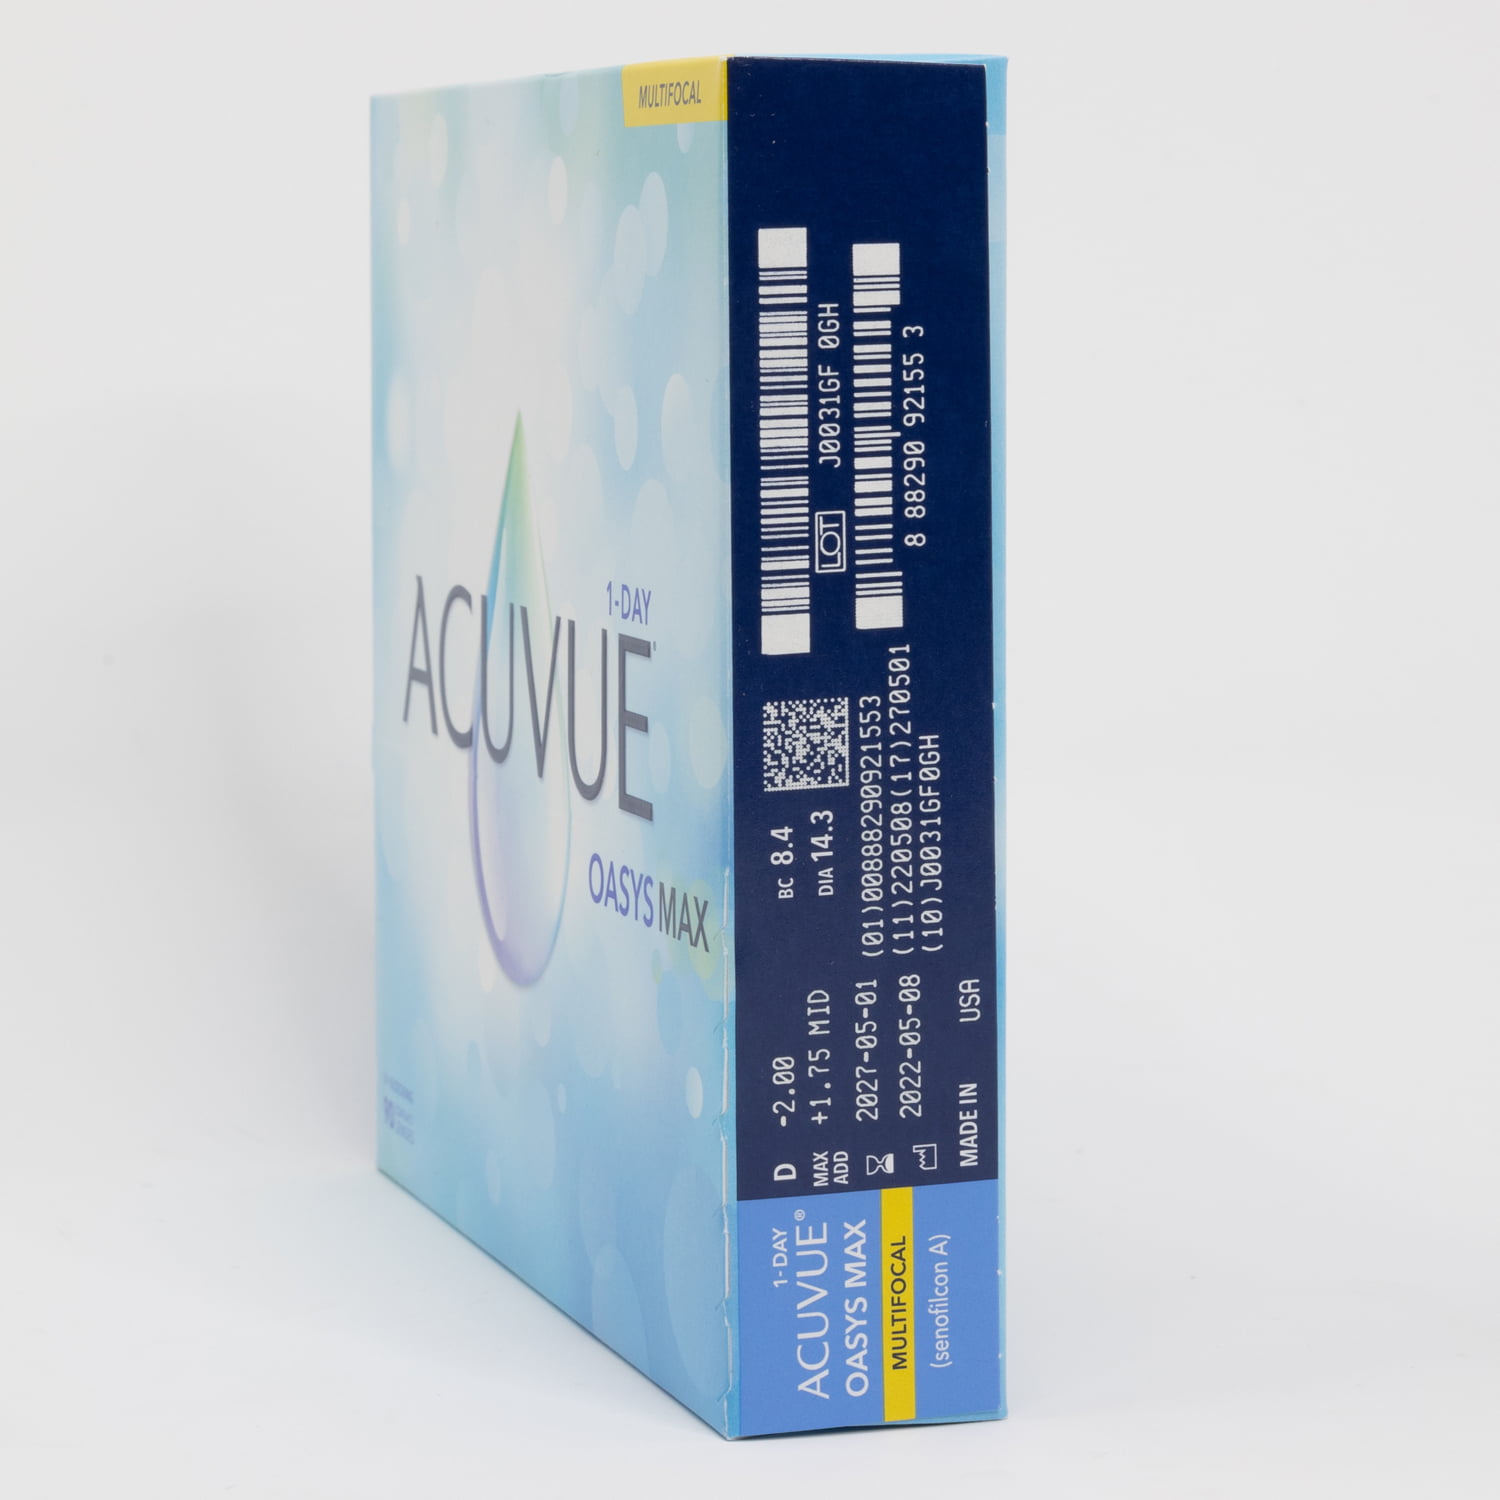 acuvue-oasys-max-1-day-multifocal-90-pack-contacts-webeyecare